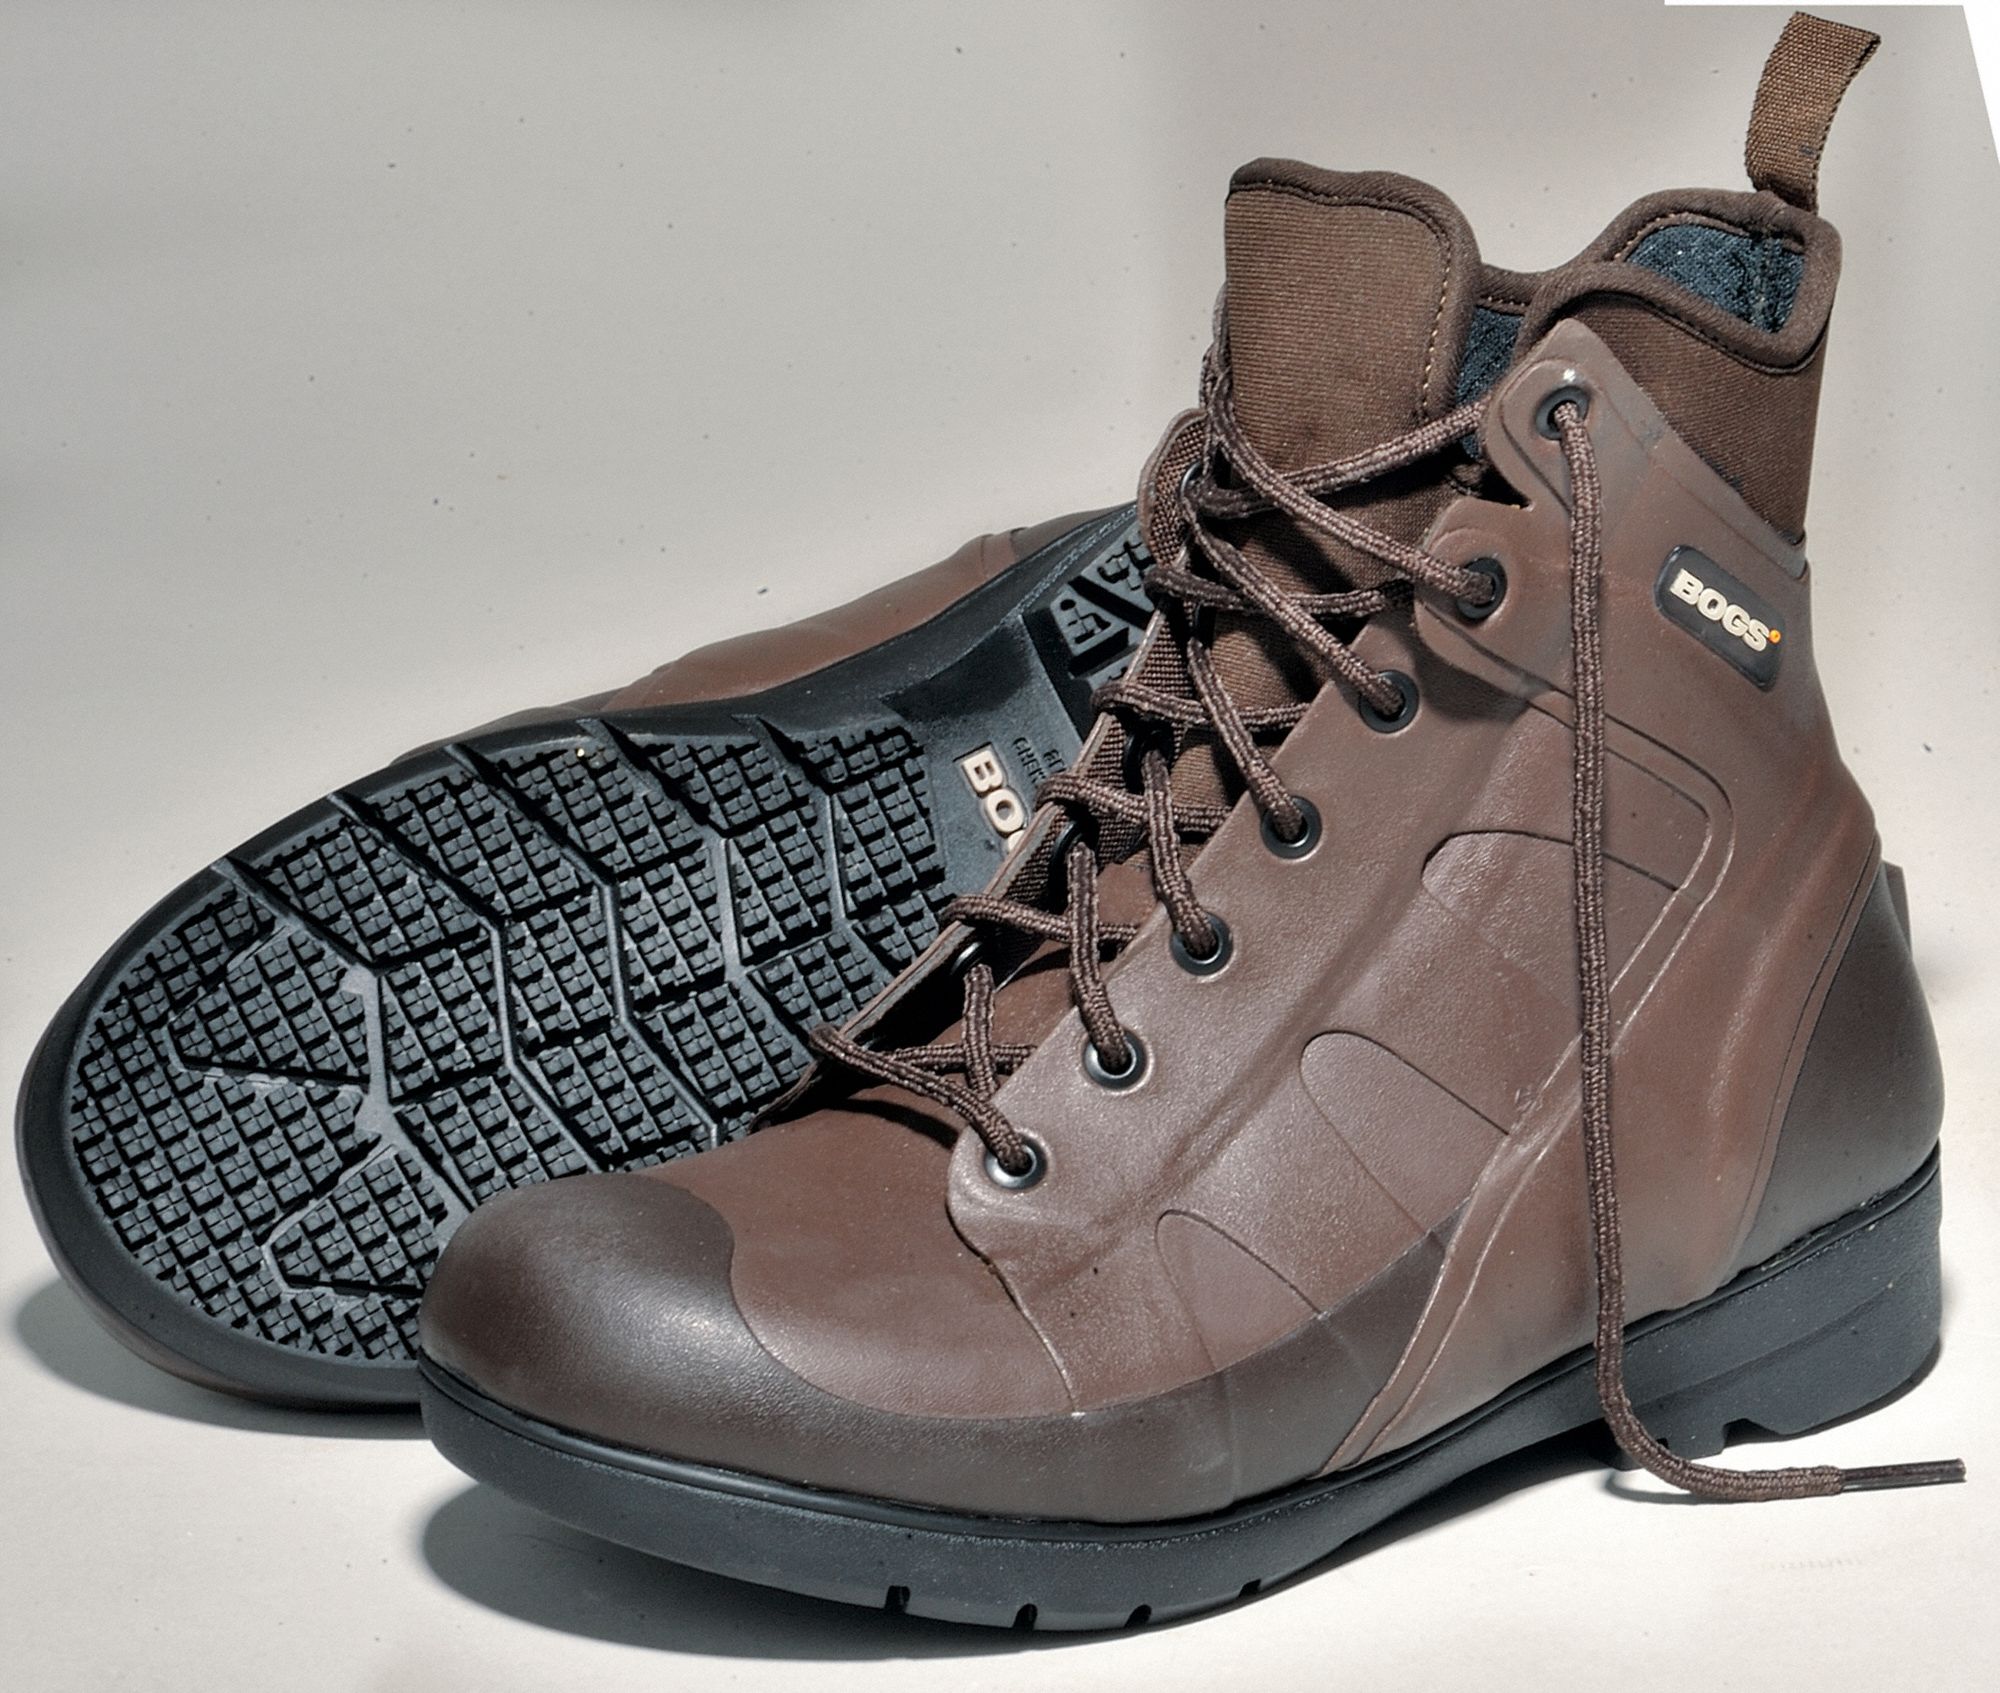 Work Boot: Cold-Insulated/Plain Toe/Waterproof, 8, 1 PR